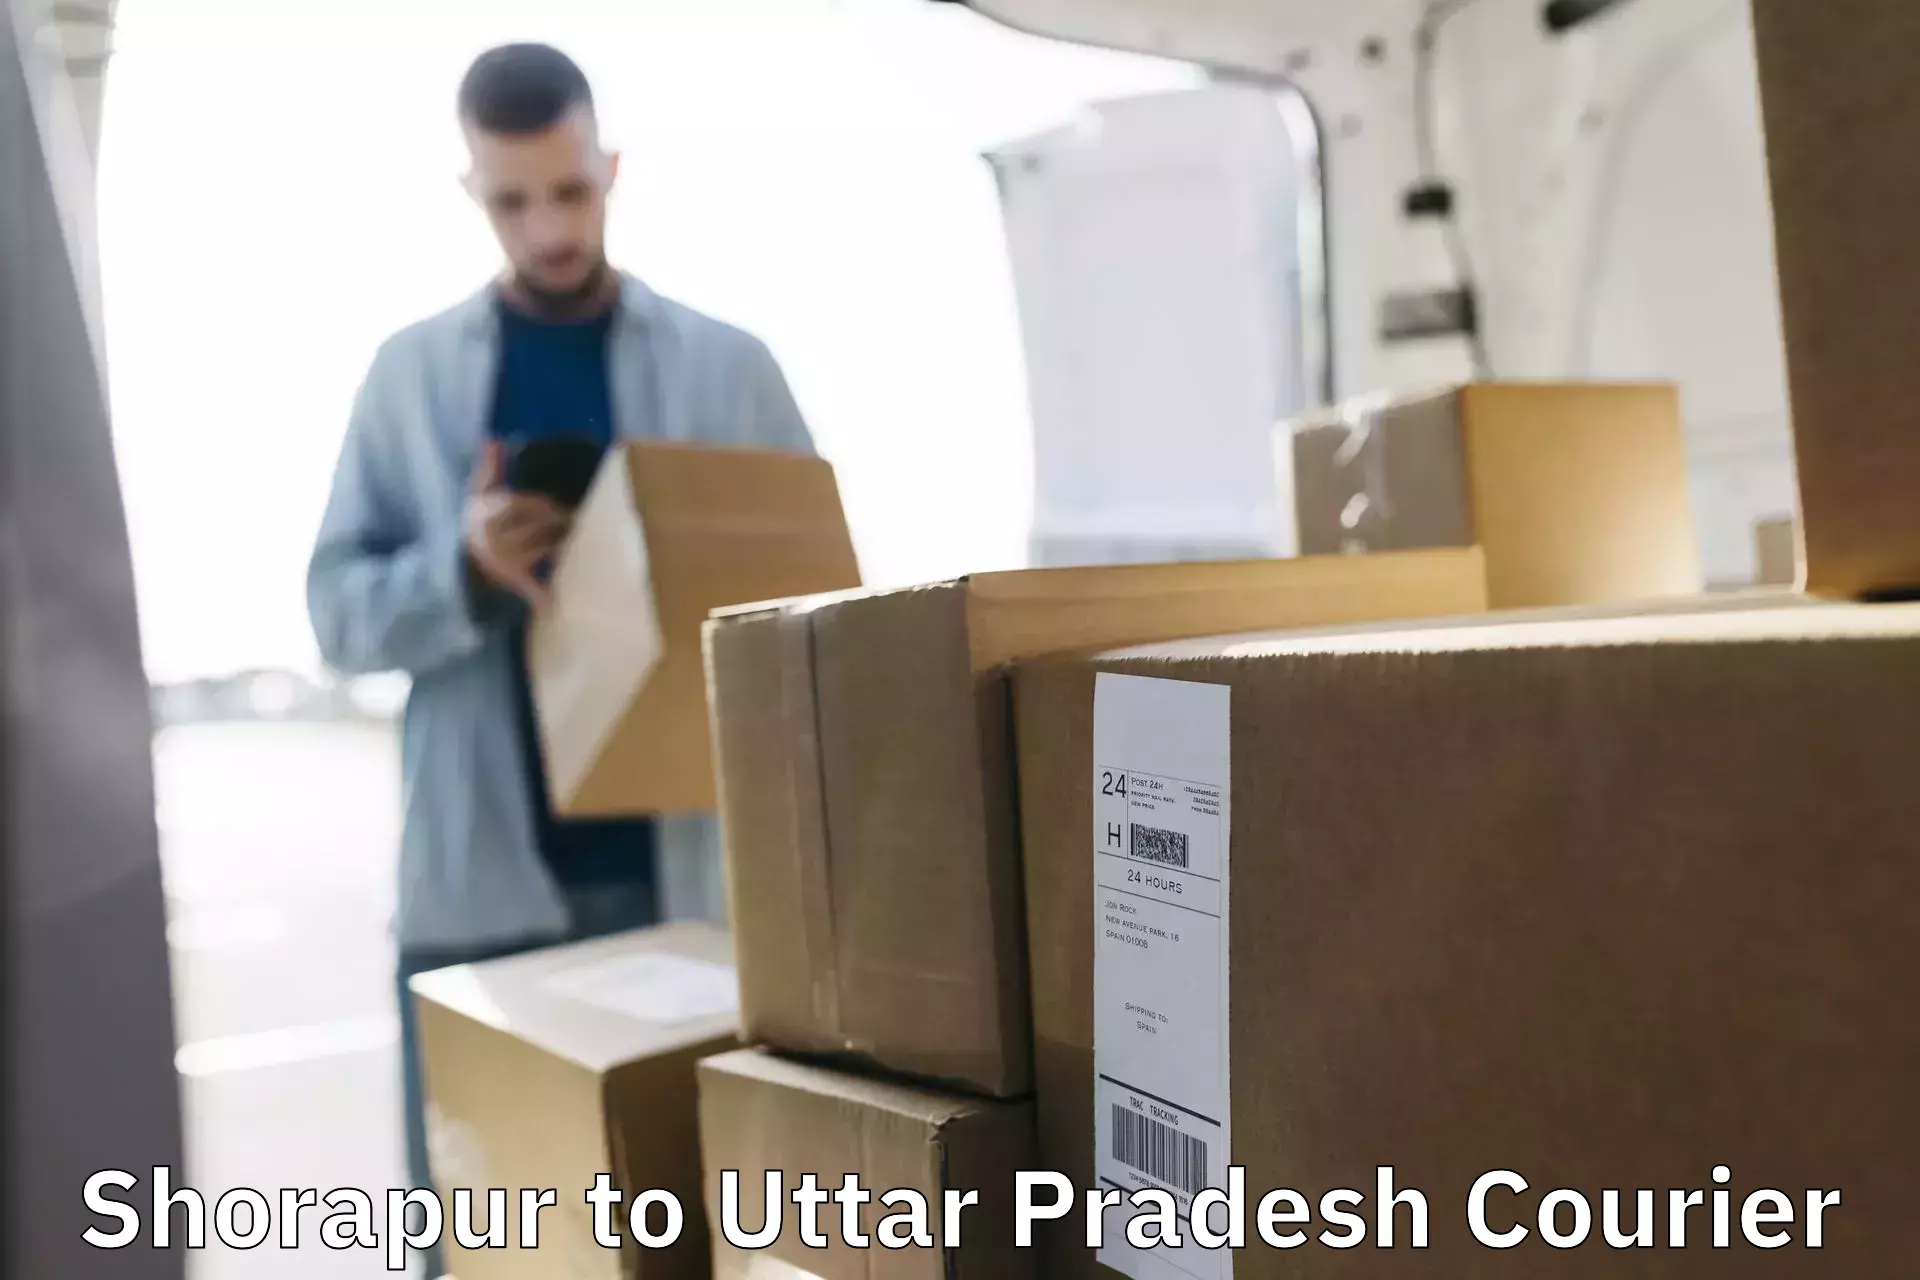 State-of-the-art courier technology Shorapur to Cholapur